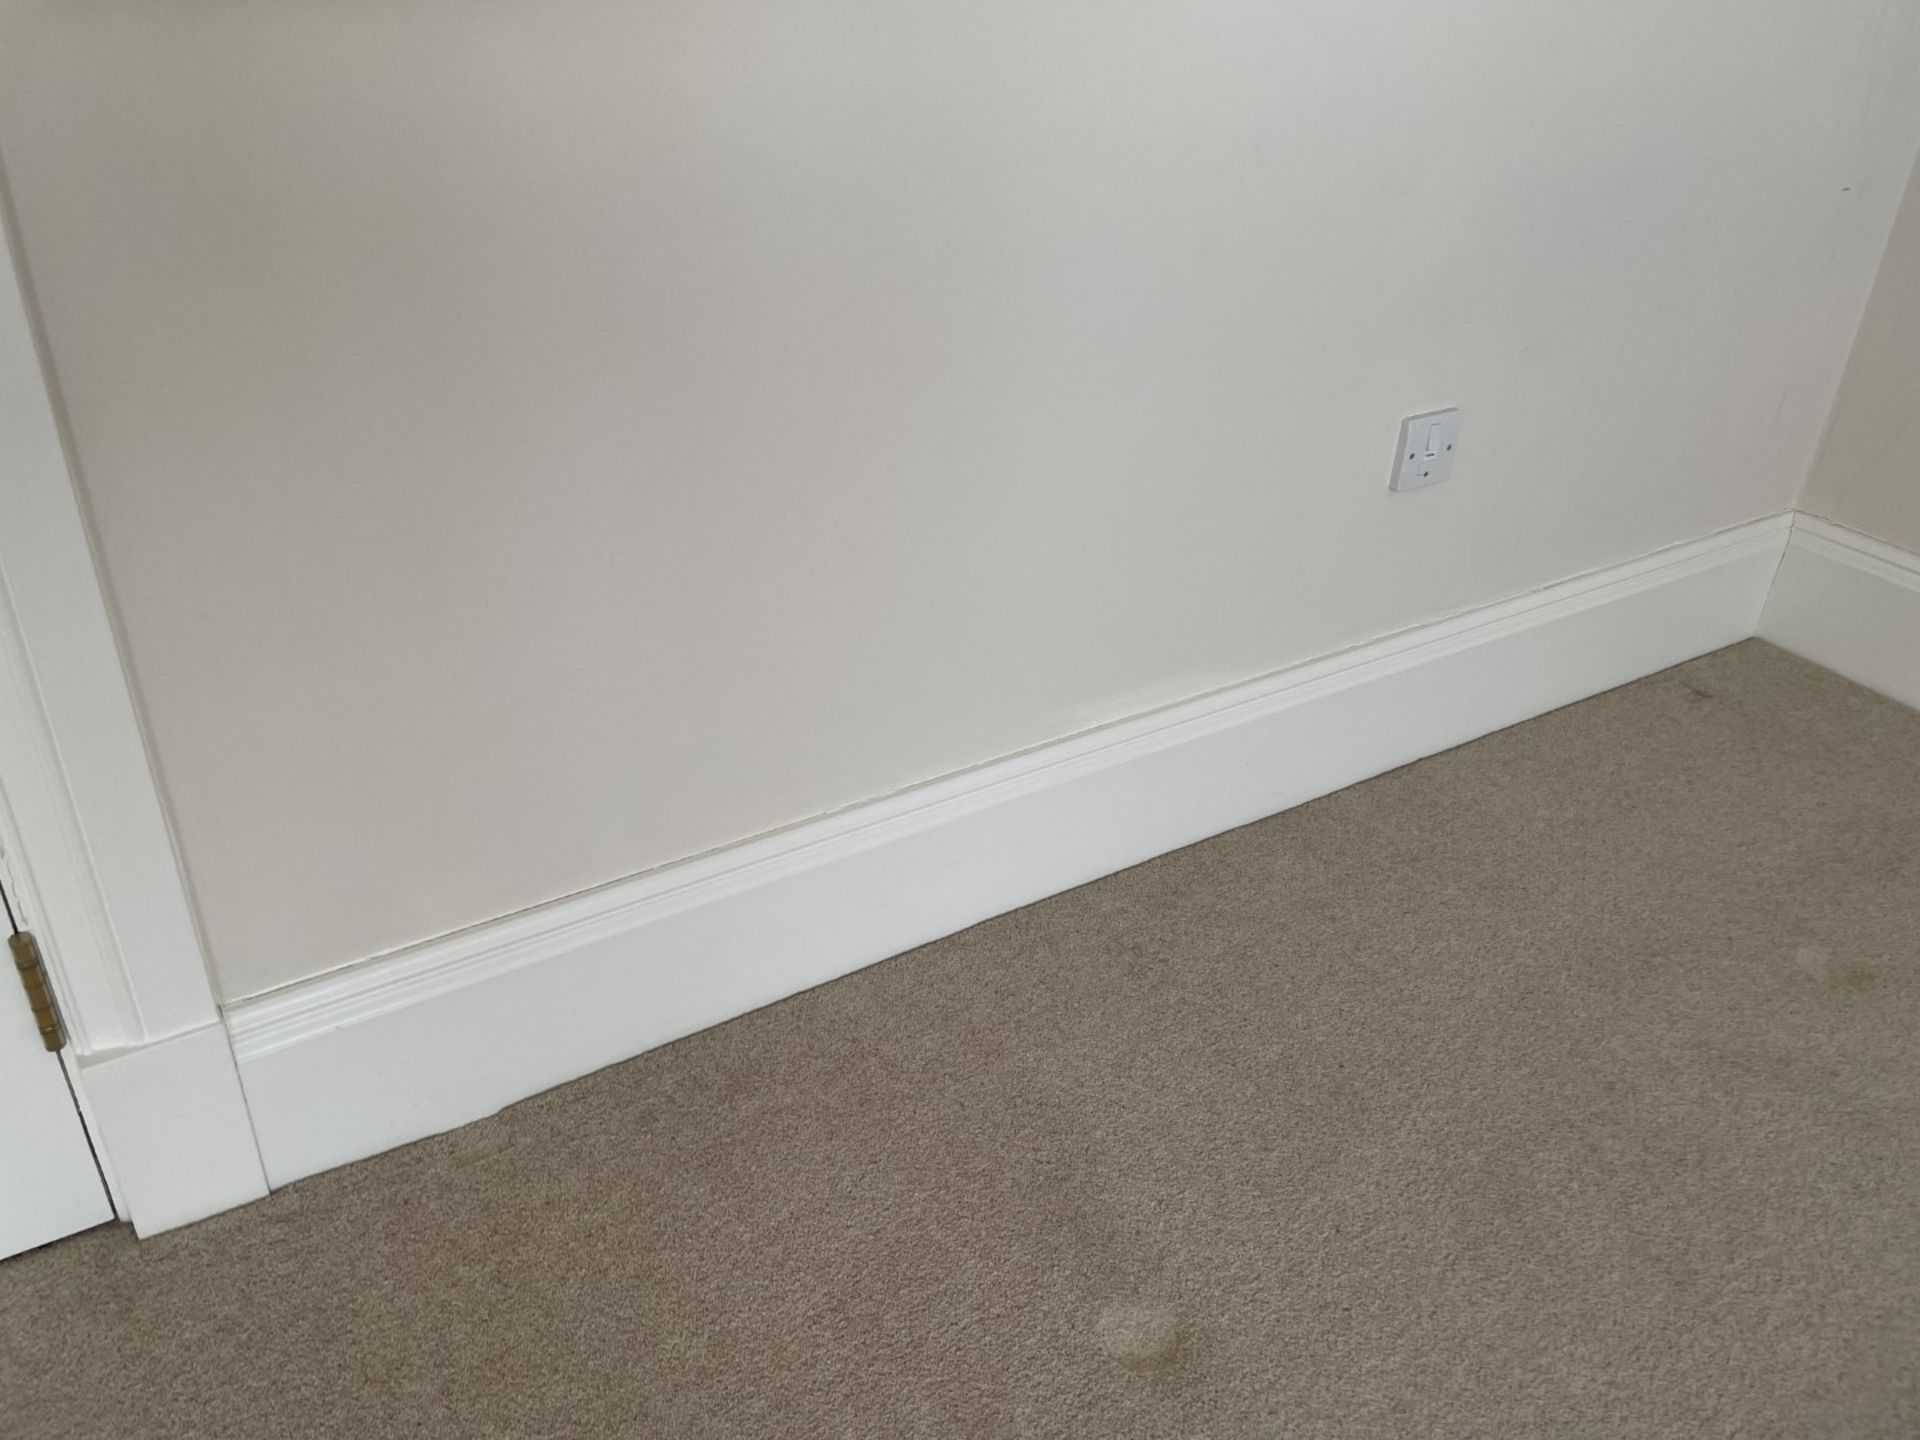 Approximately 20-Metres of Timber Wooden Skirting Boards, In White - Image 3 of 7